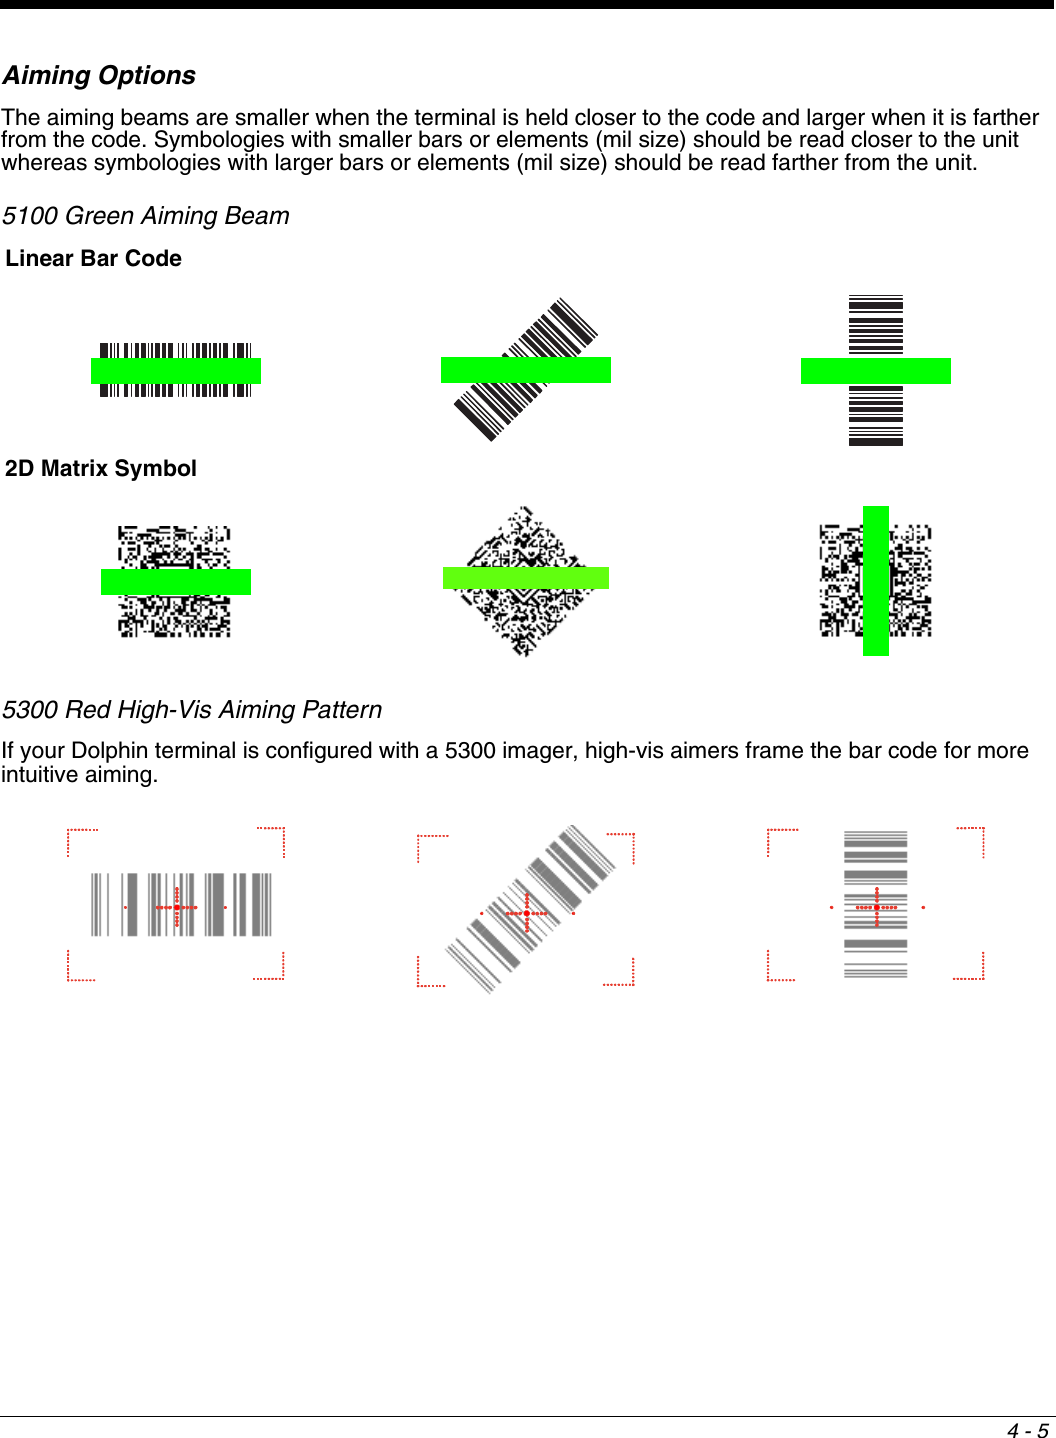 4 - 5Aiming Options The aiming beams are smaller when the terminal is held closer to the code and larger when it is farther from the code. Symbologies with smaller bars or elements (mil size) should be read closer to the unit whereas symbologies with larger bars or elements (mil size) should be read farther from the unit.5100 Green Aiming Beam 5300 Red High-Vis Aiming PatternIf your Dolphin terminal is configured with a 5300 imager, high-vis aimers frame the bar code for more intuitive aiming. Linear Bar Code2D Matrix Symbol